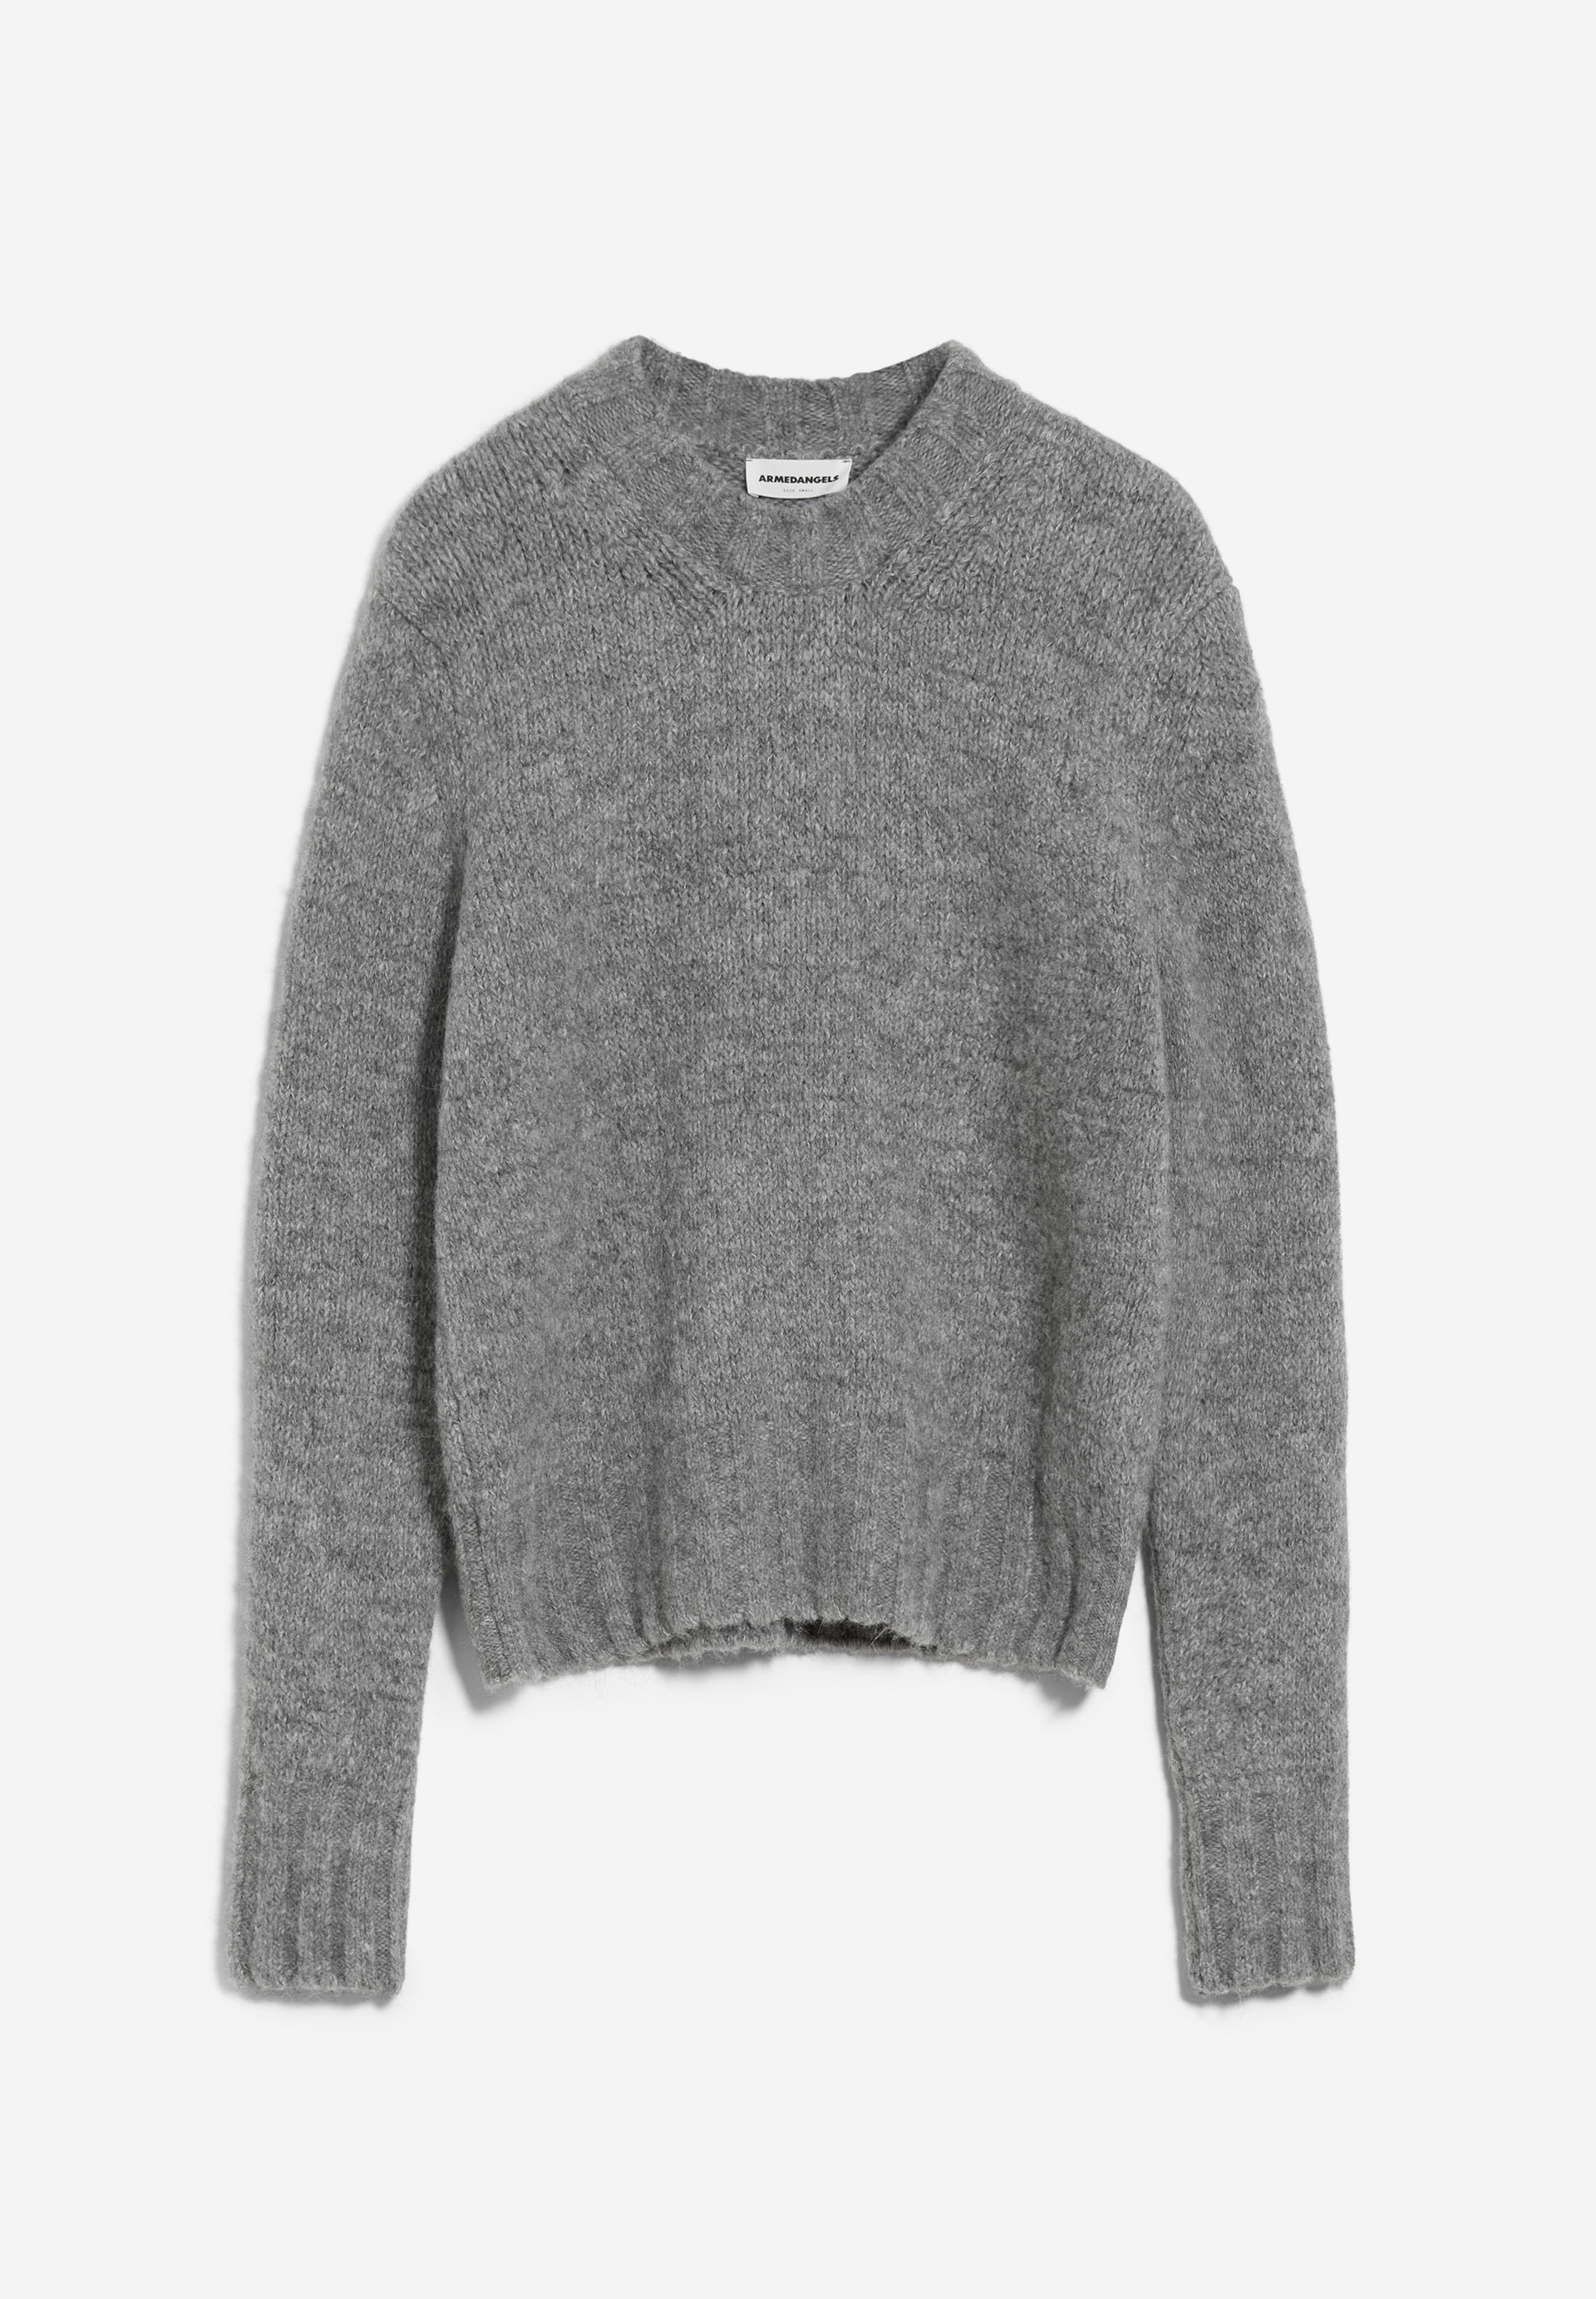 MAYLAA PREMIUM Knit Sweater Relaxed Fit made of Alpaca Wool Mix